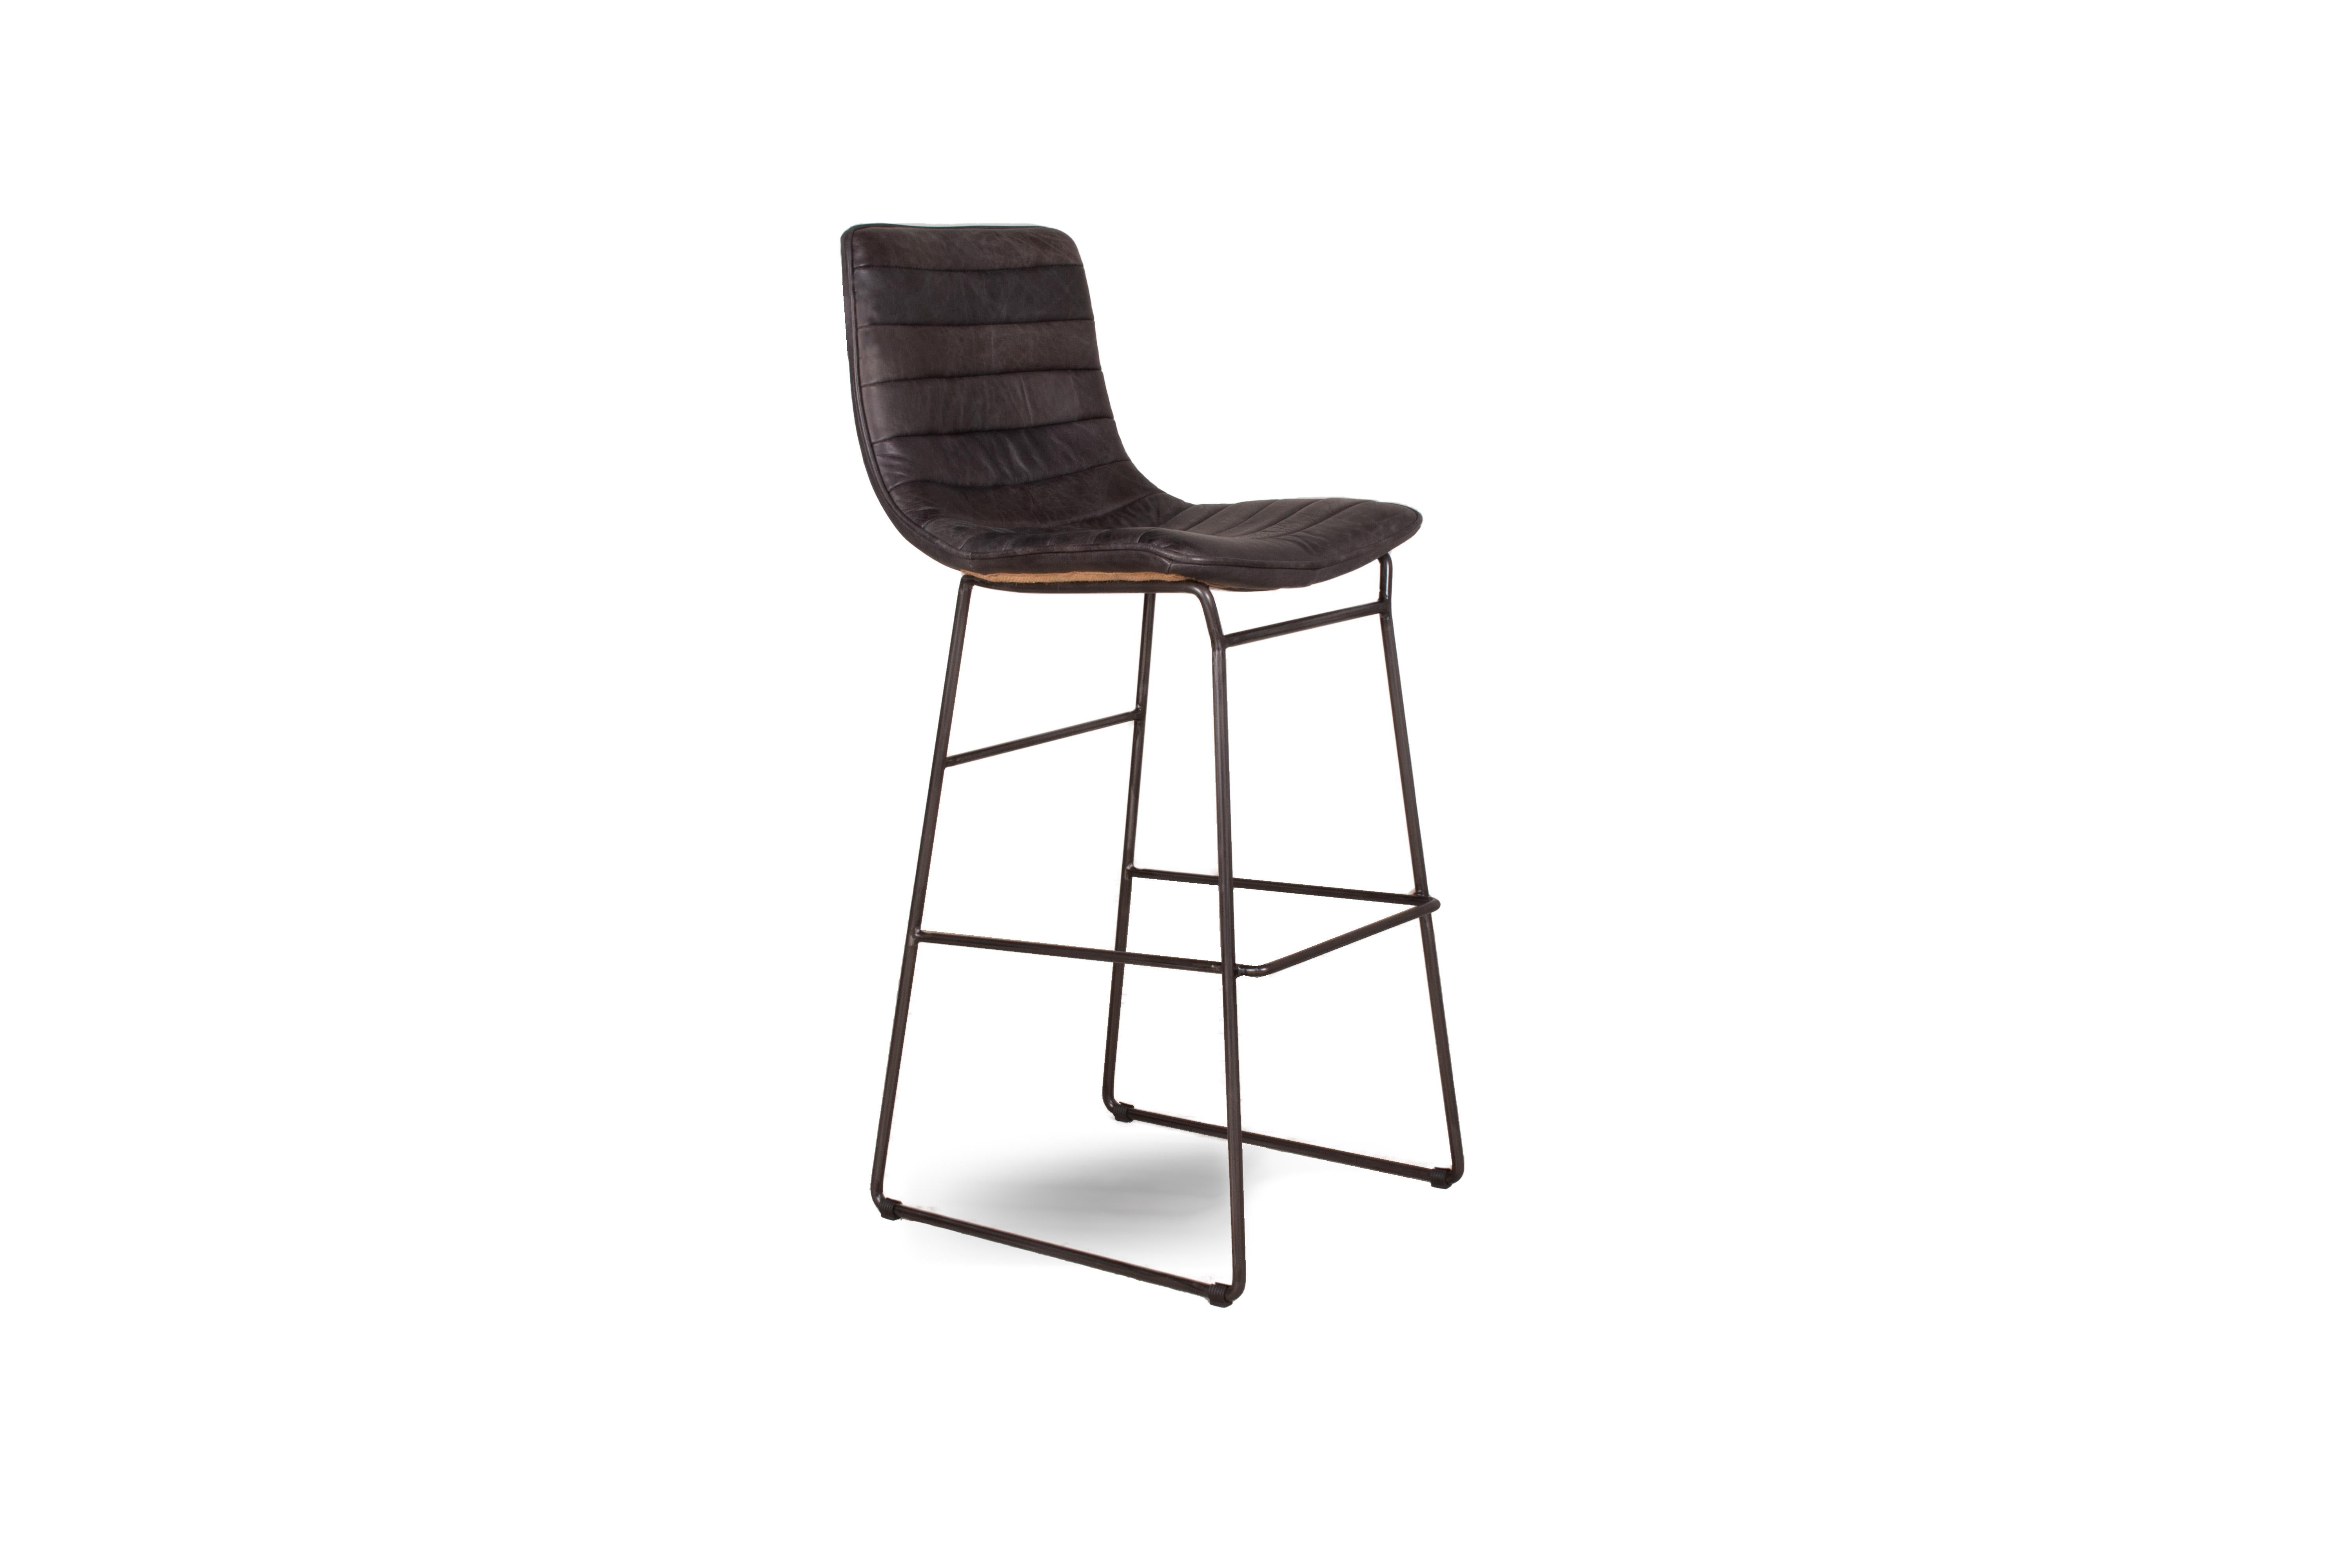 Modern Bar Chair in Channeled Leather with Steel Base In Good Condition For Sale In Dallas, TX